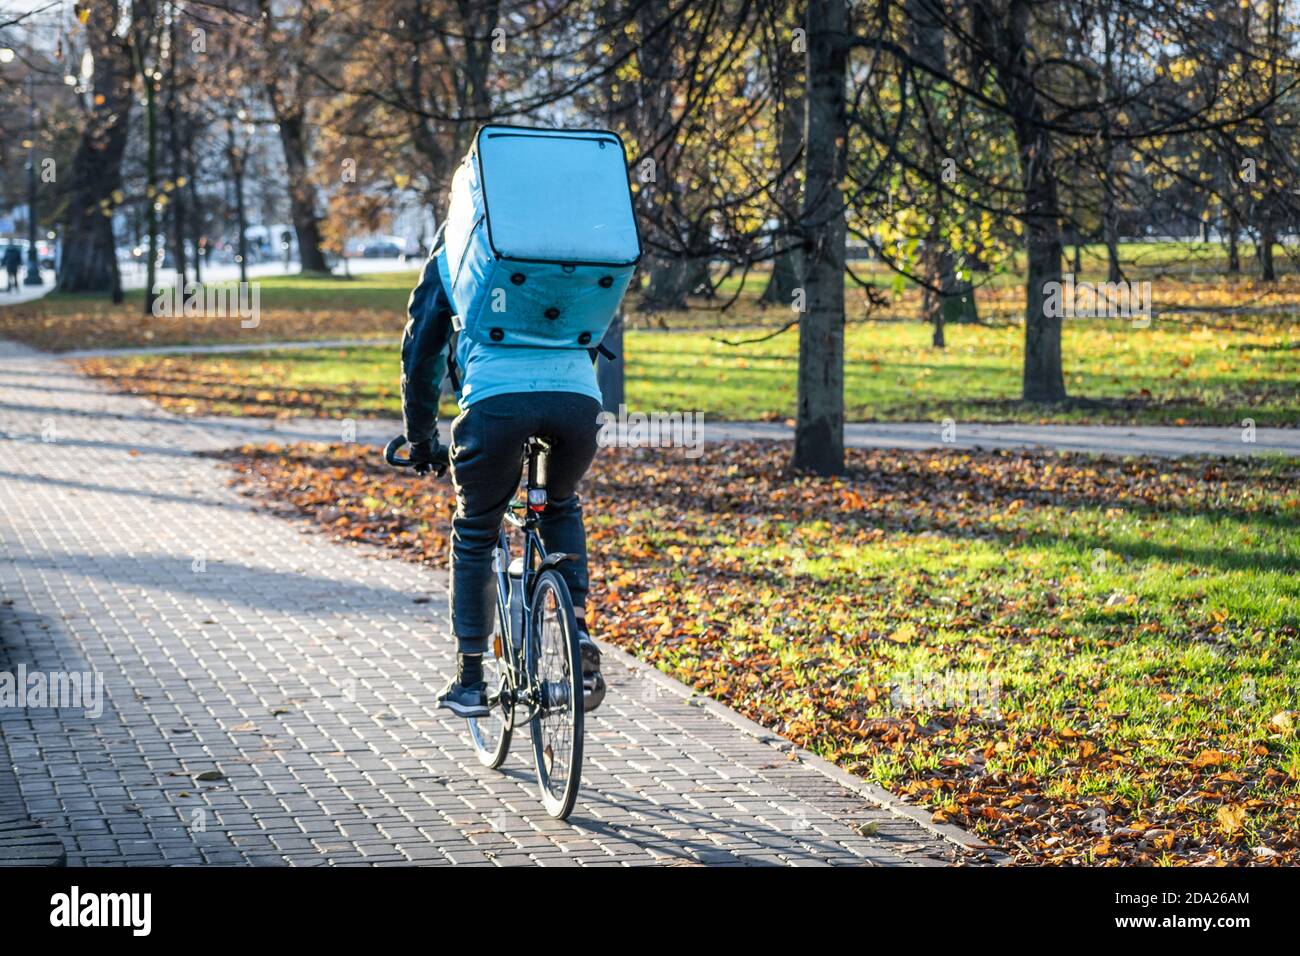 Rider with bike delivering food, online food ordering and delivery service that takes orders via a mobile app during Covid or Coronavirus time Stock Photo